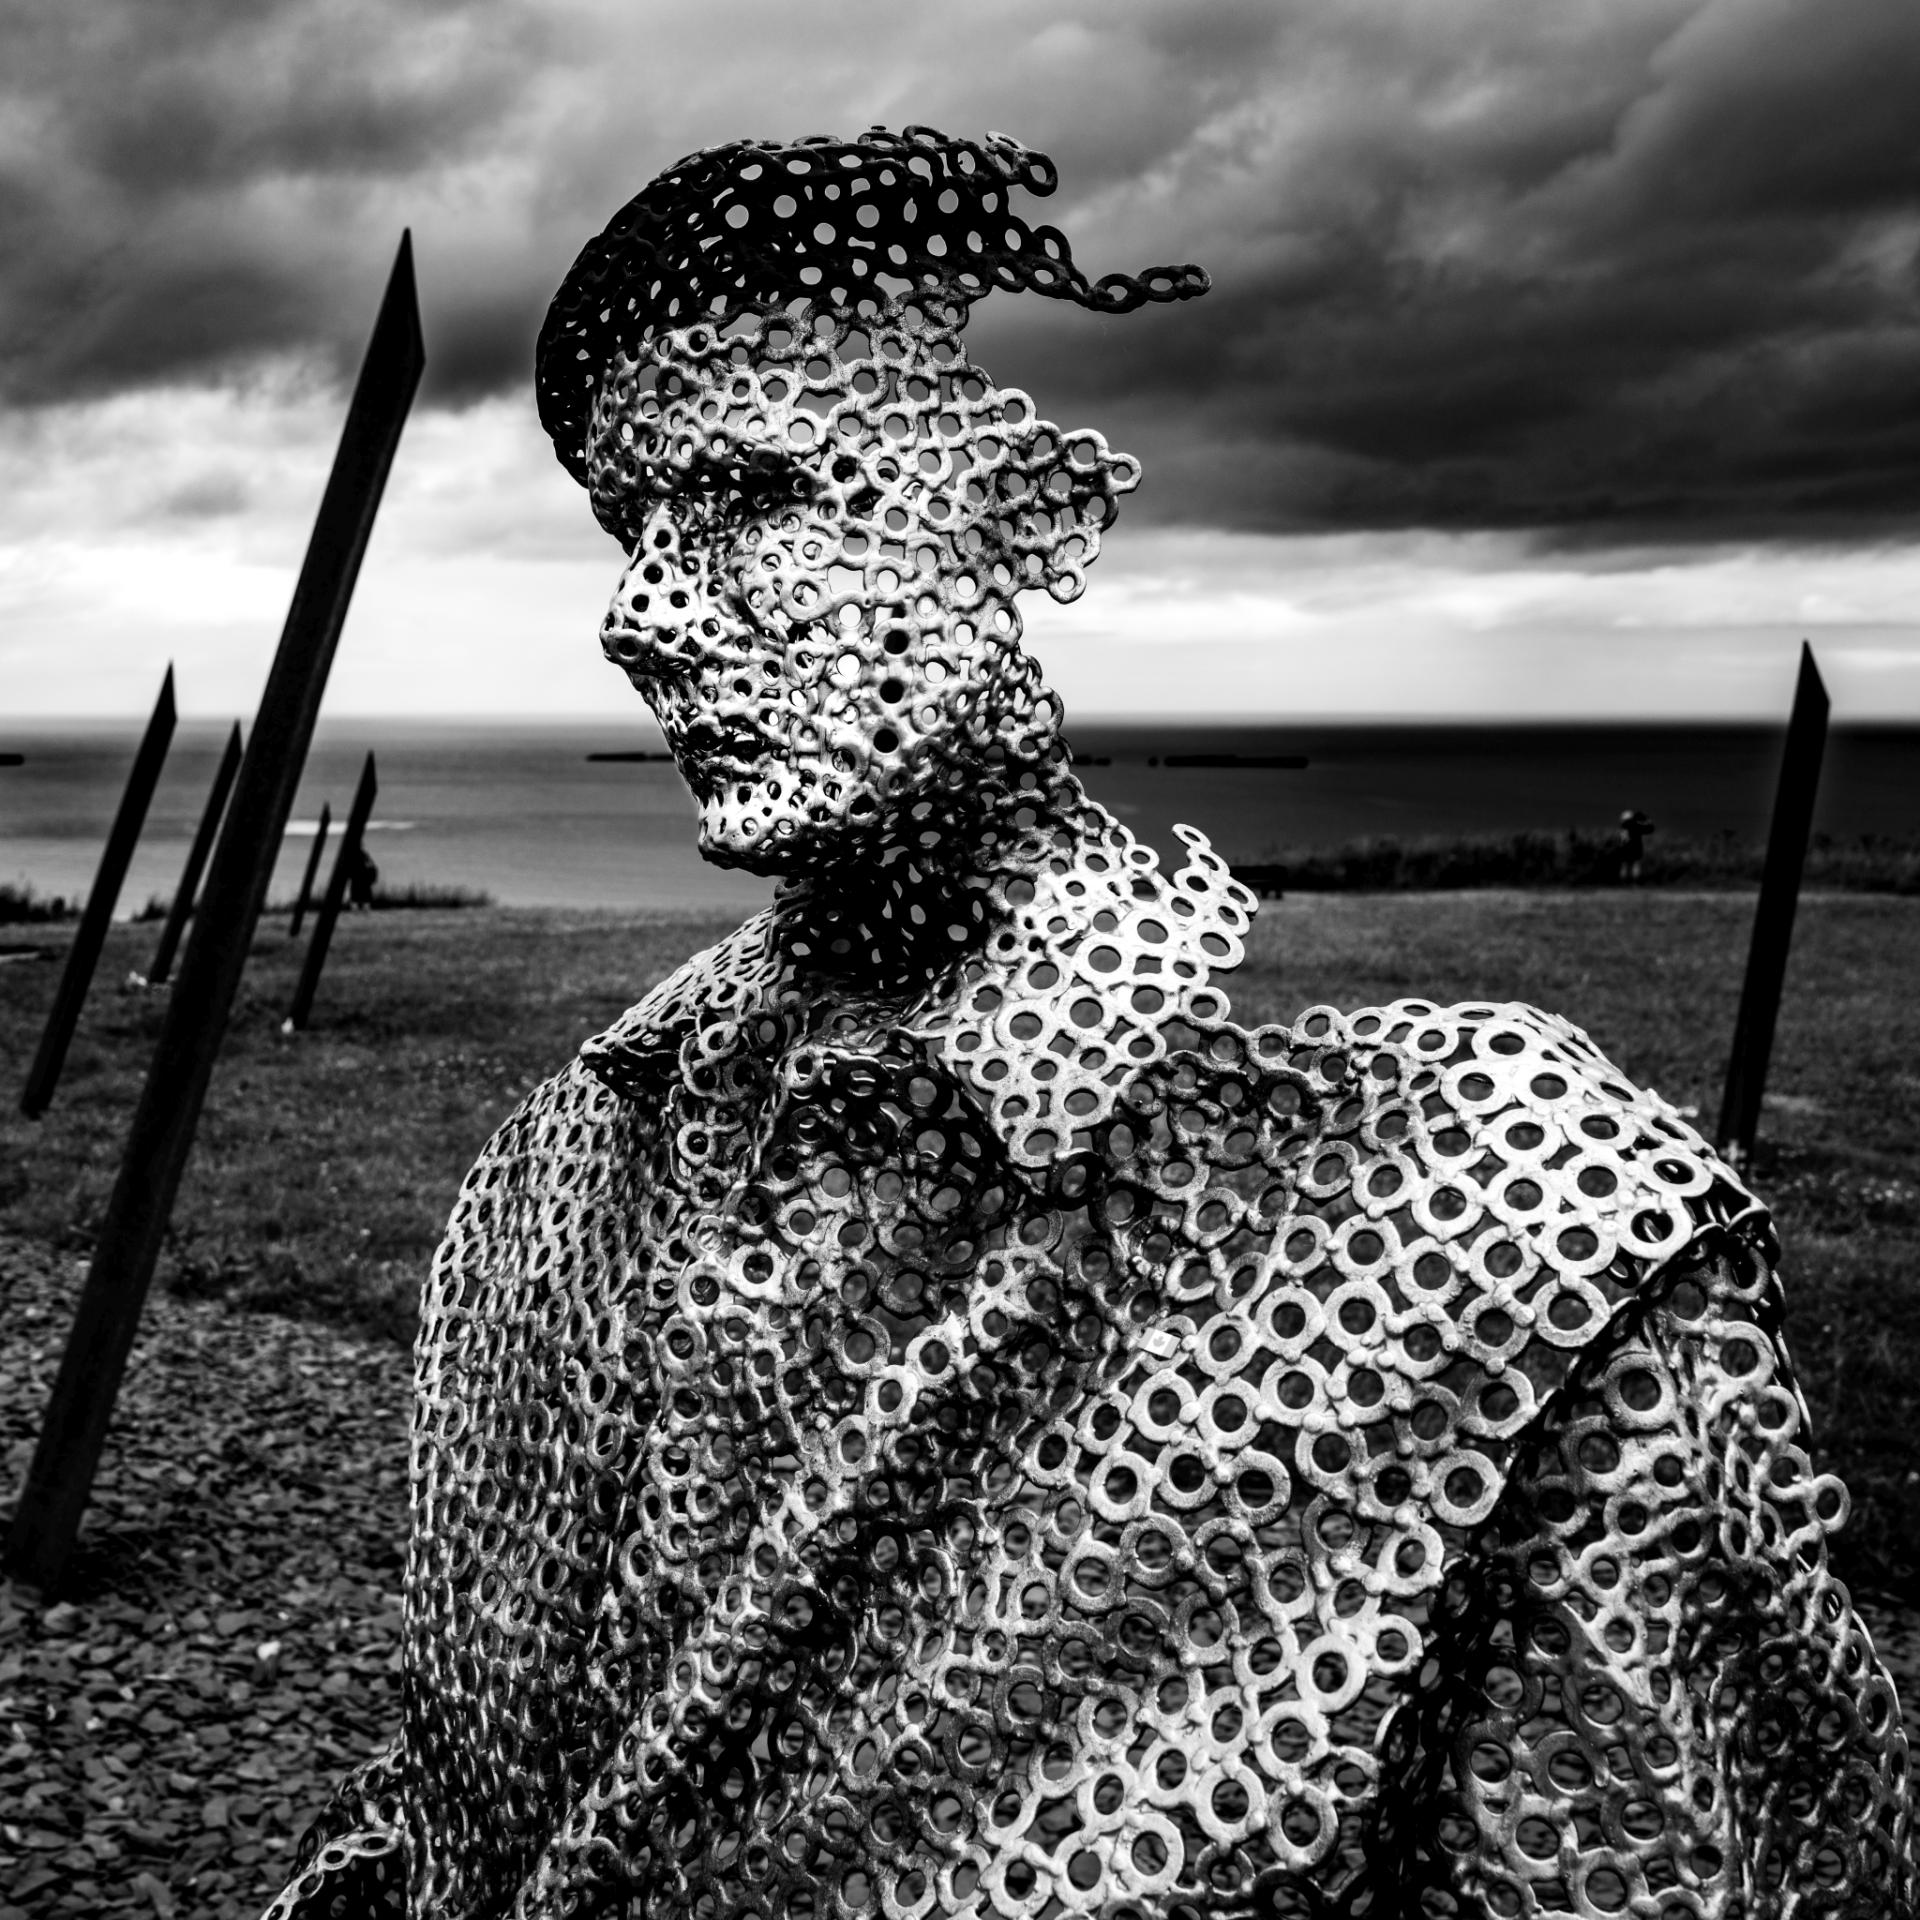 New York Photography Awards Winner - Canadian soldier at Juno Beach